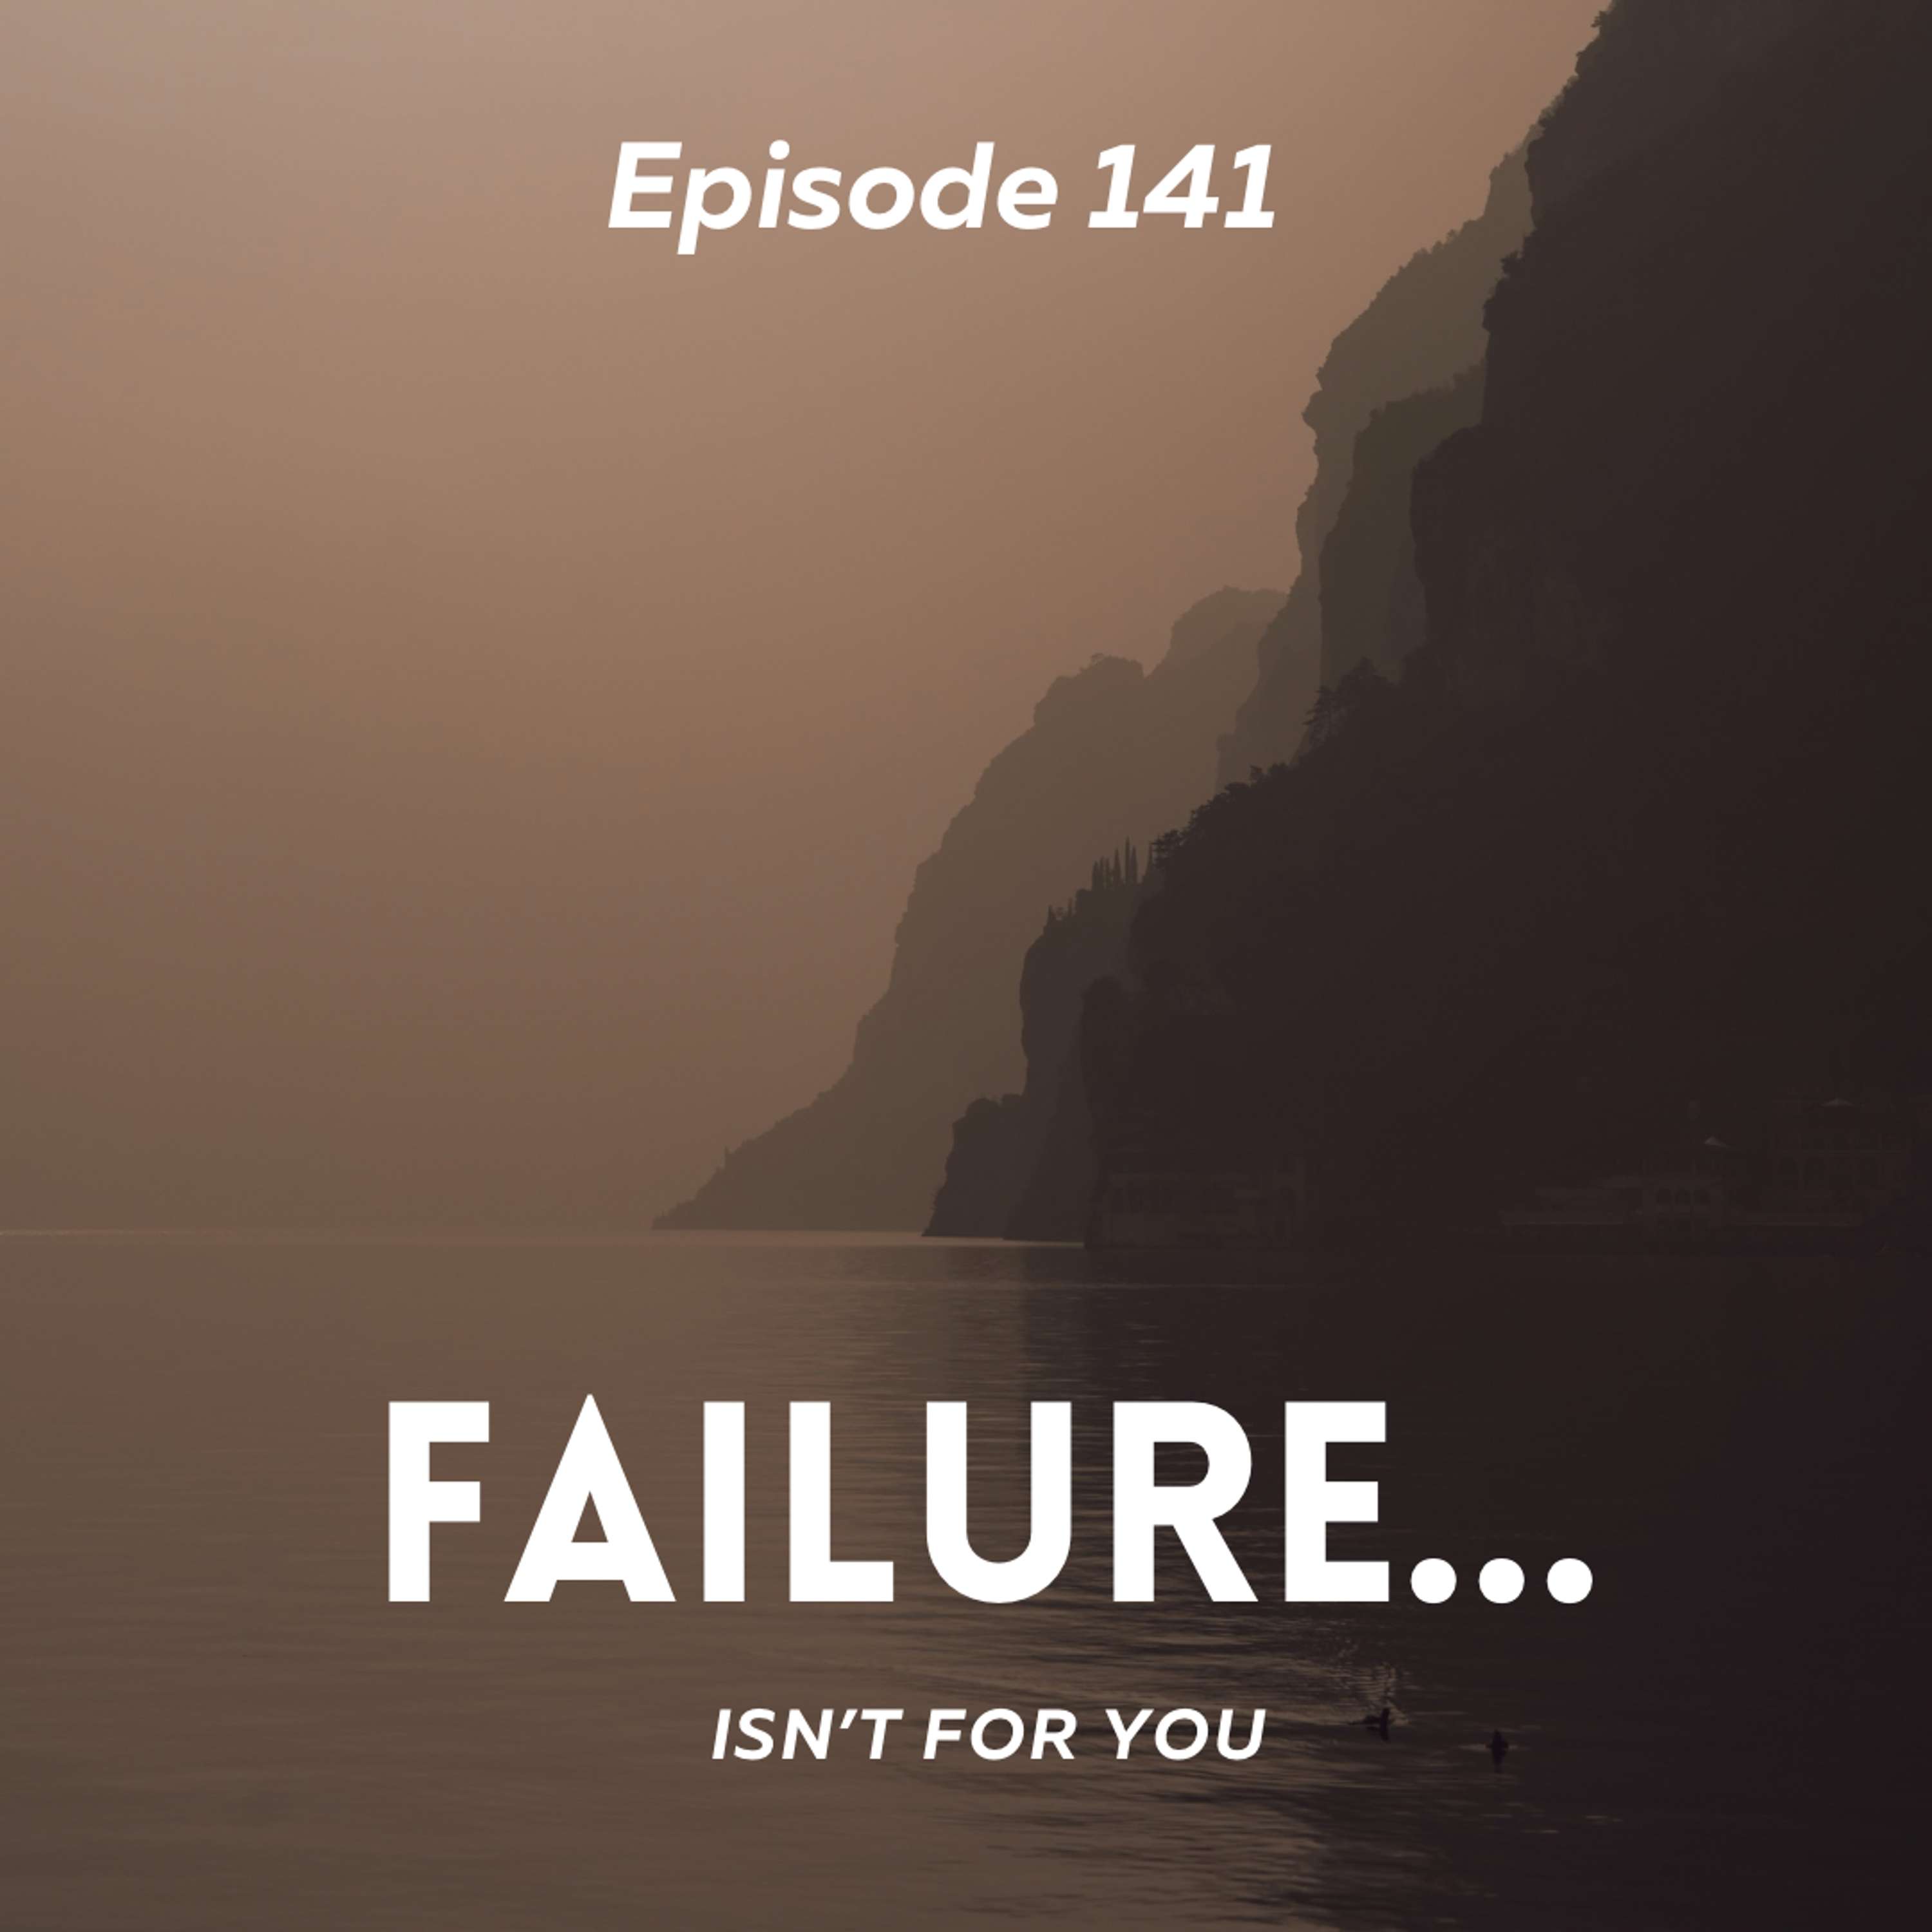 Failure isn't for you